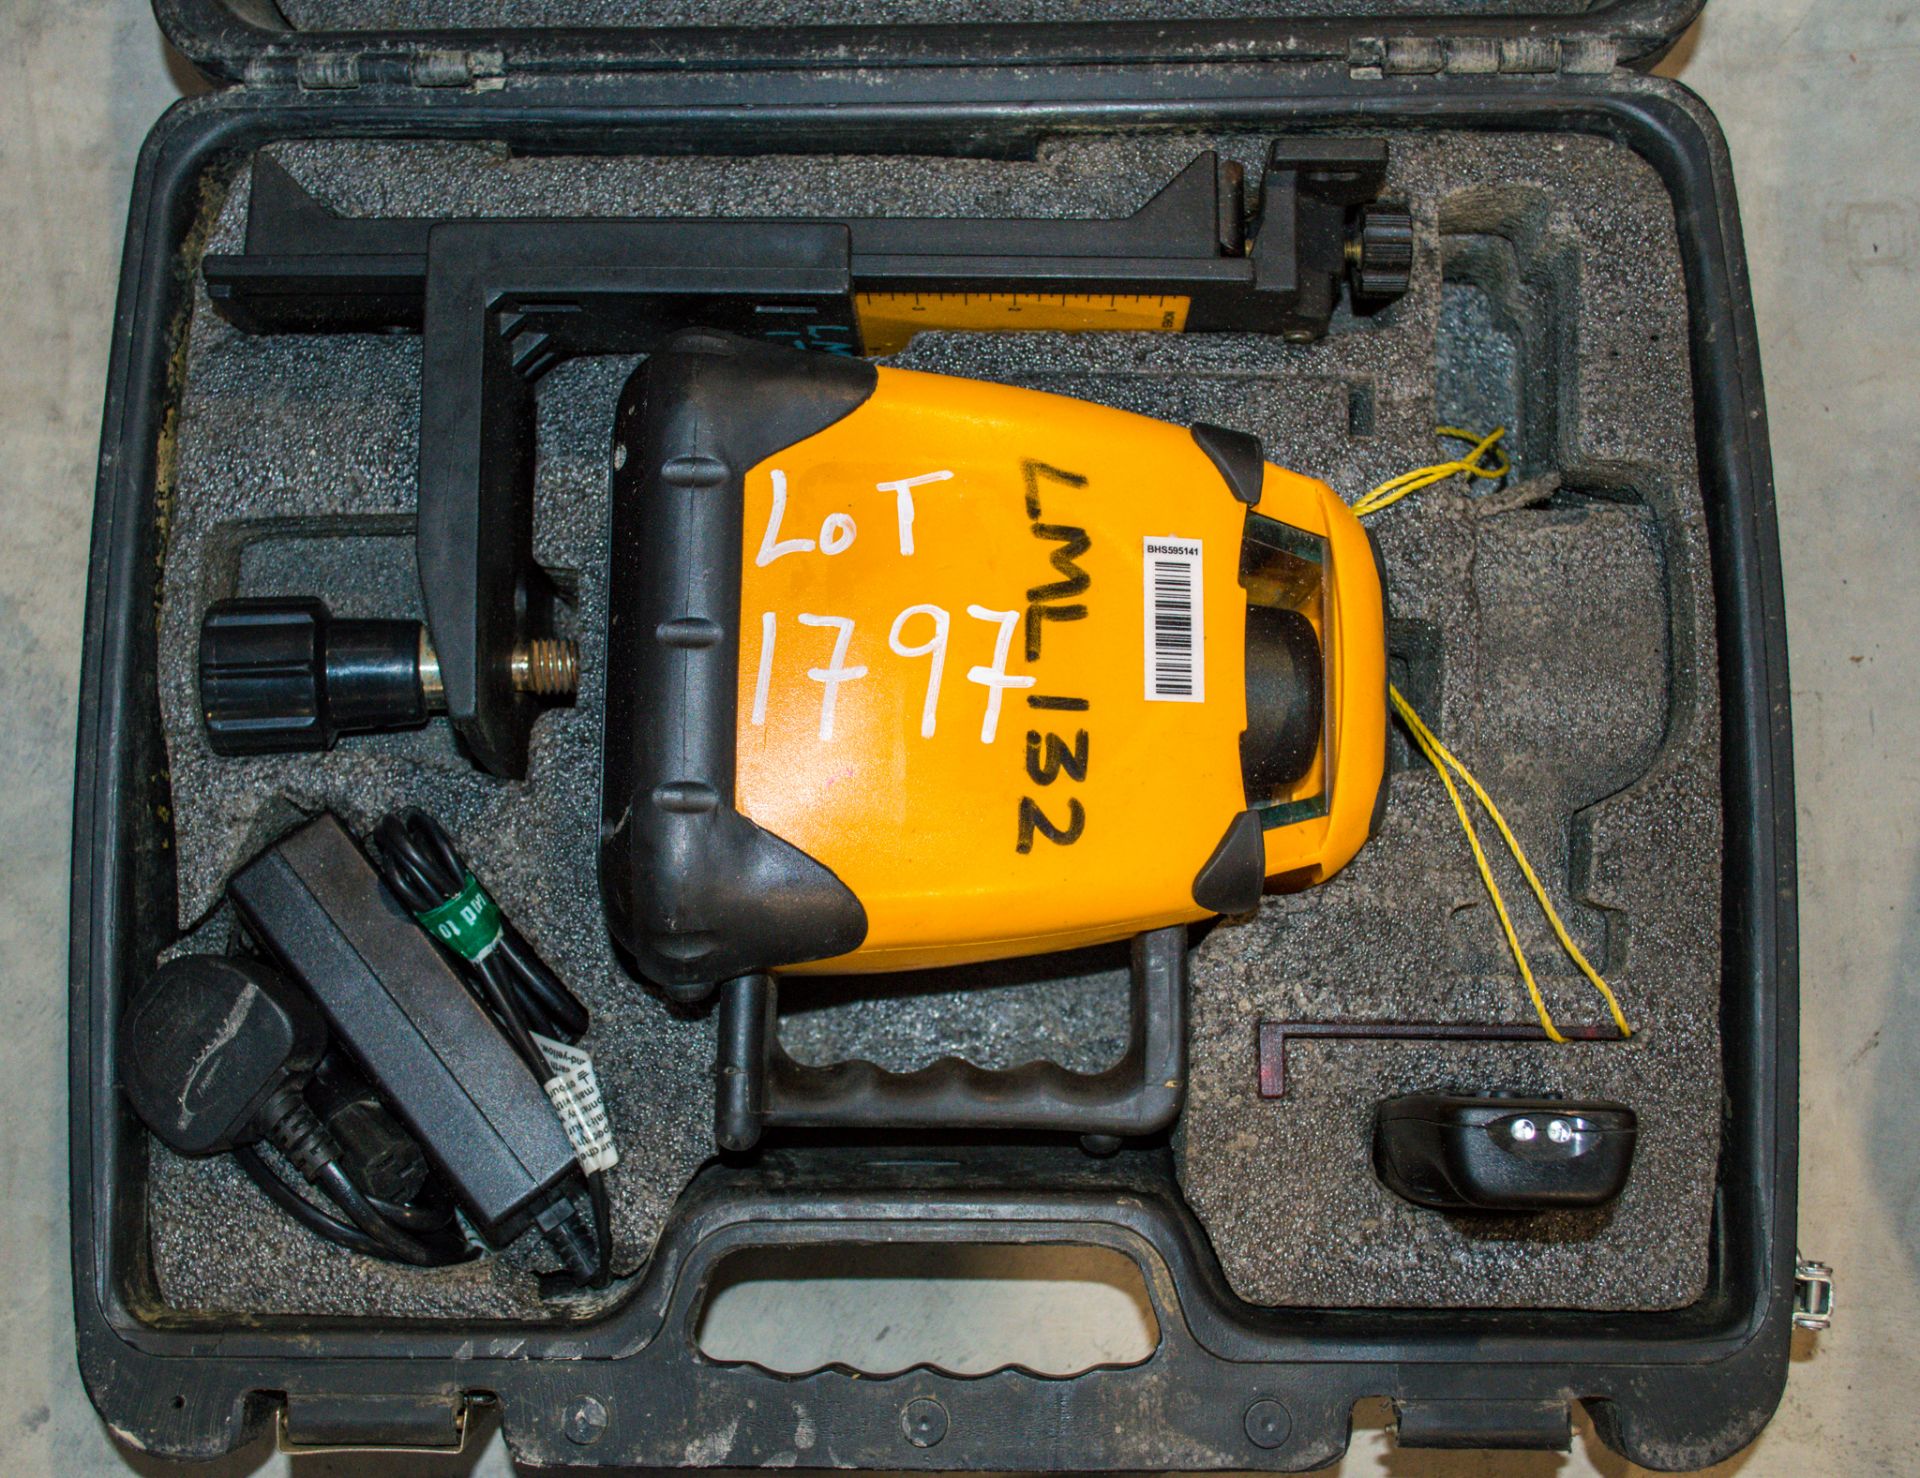 Profile PLP-190 laser level c/w RC700 remote, charger and carry case LML132